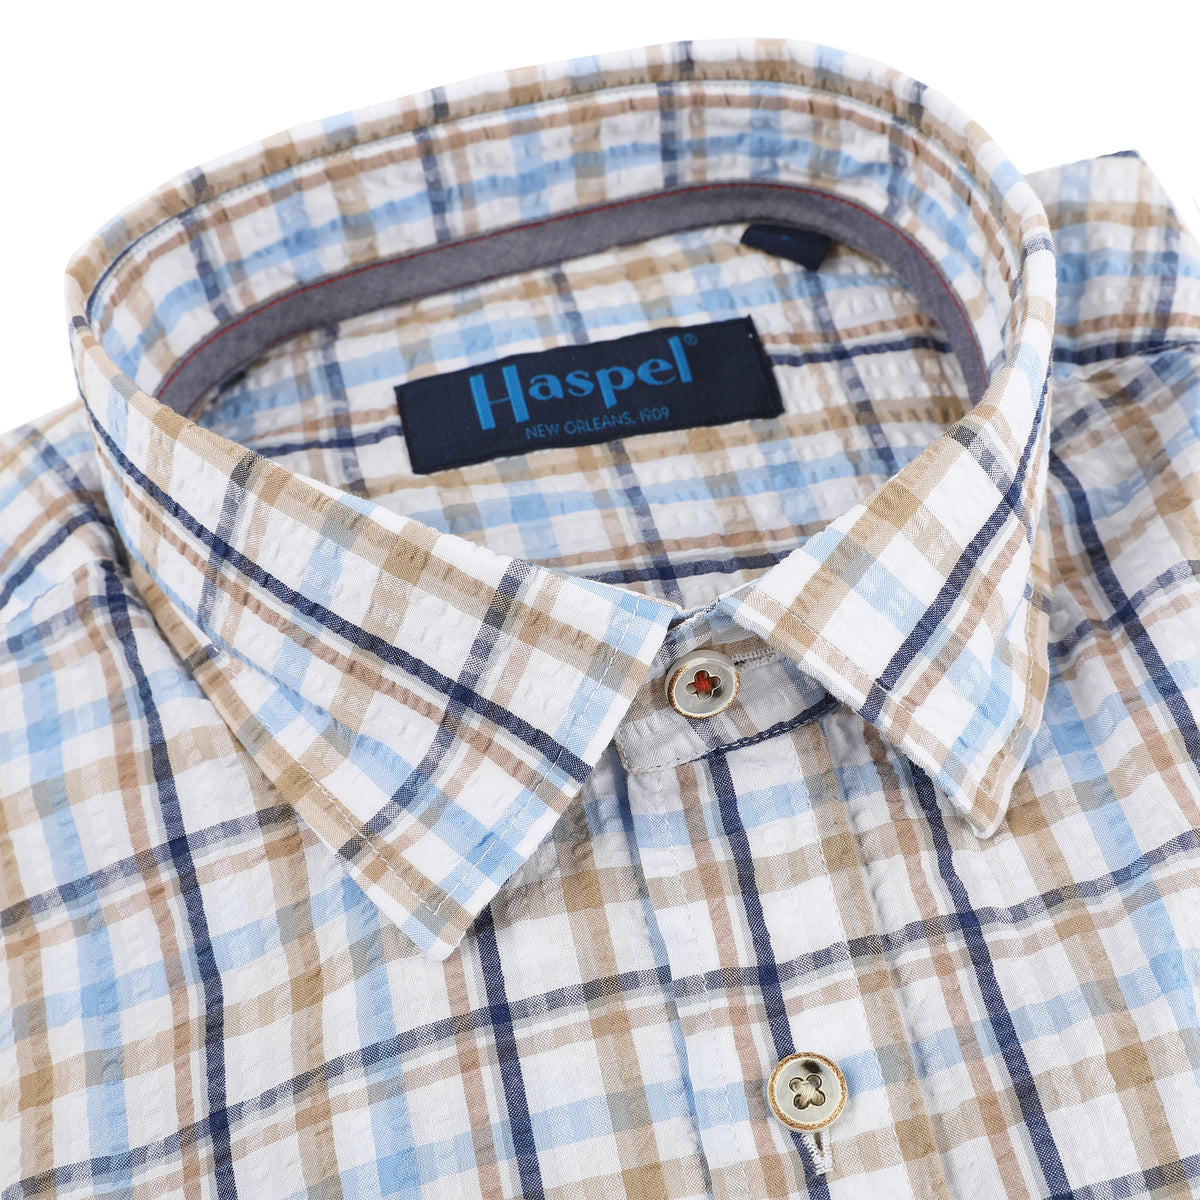 Look oh-so-cool and stay feeling hot with this Naples Blue &amp; Tan Long Sleeve Check Seersucker Shirt. Crafted from lightweight seersucker fabric that&#39;s craft fully dyed for a unique look, you&#39;ll be ready for warm weather, whatever the season. Pucker up for a style that&#39;ll have onlookers in awe.